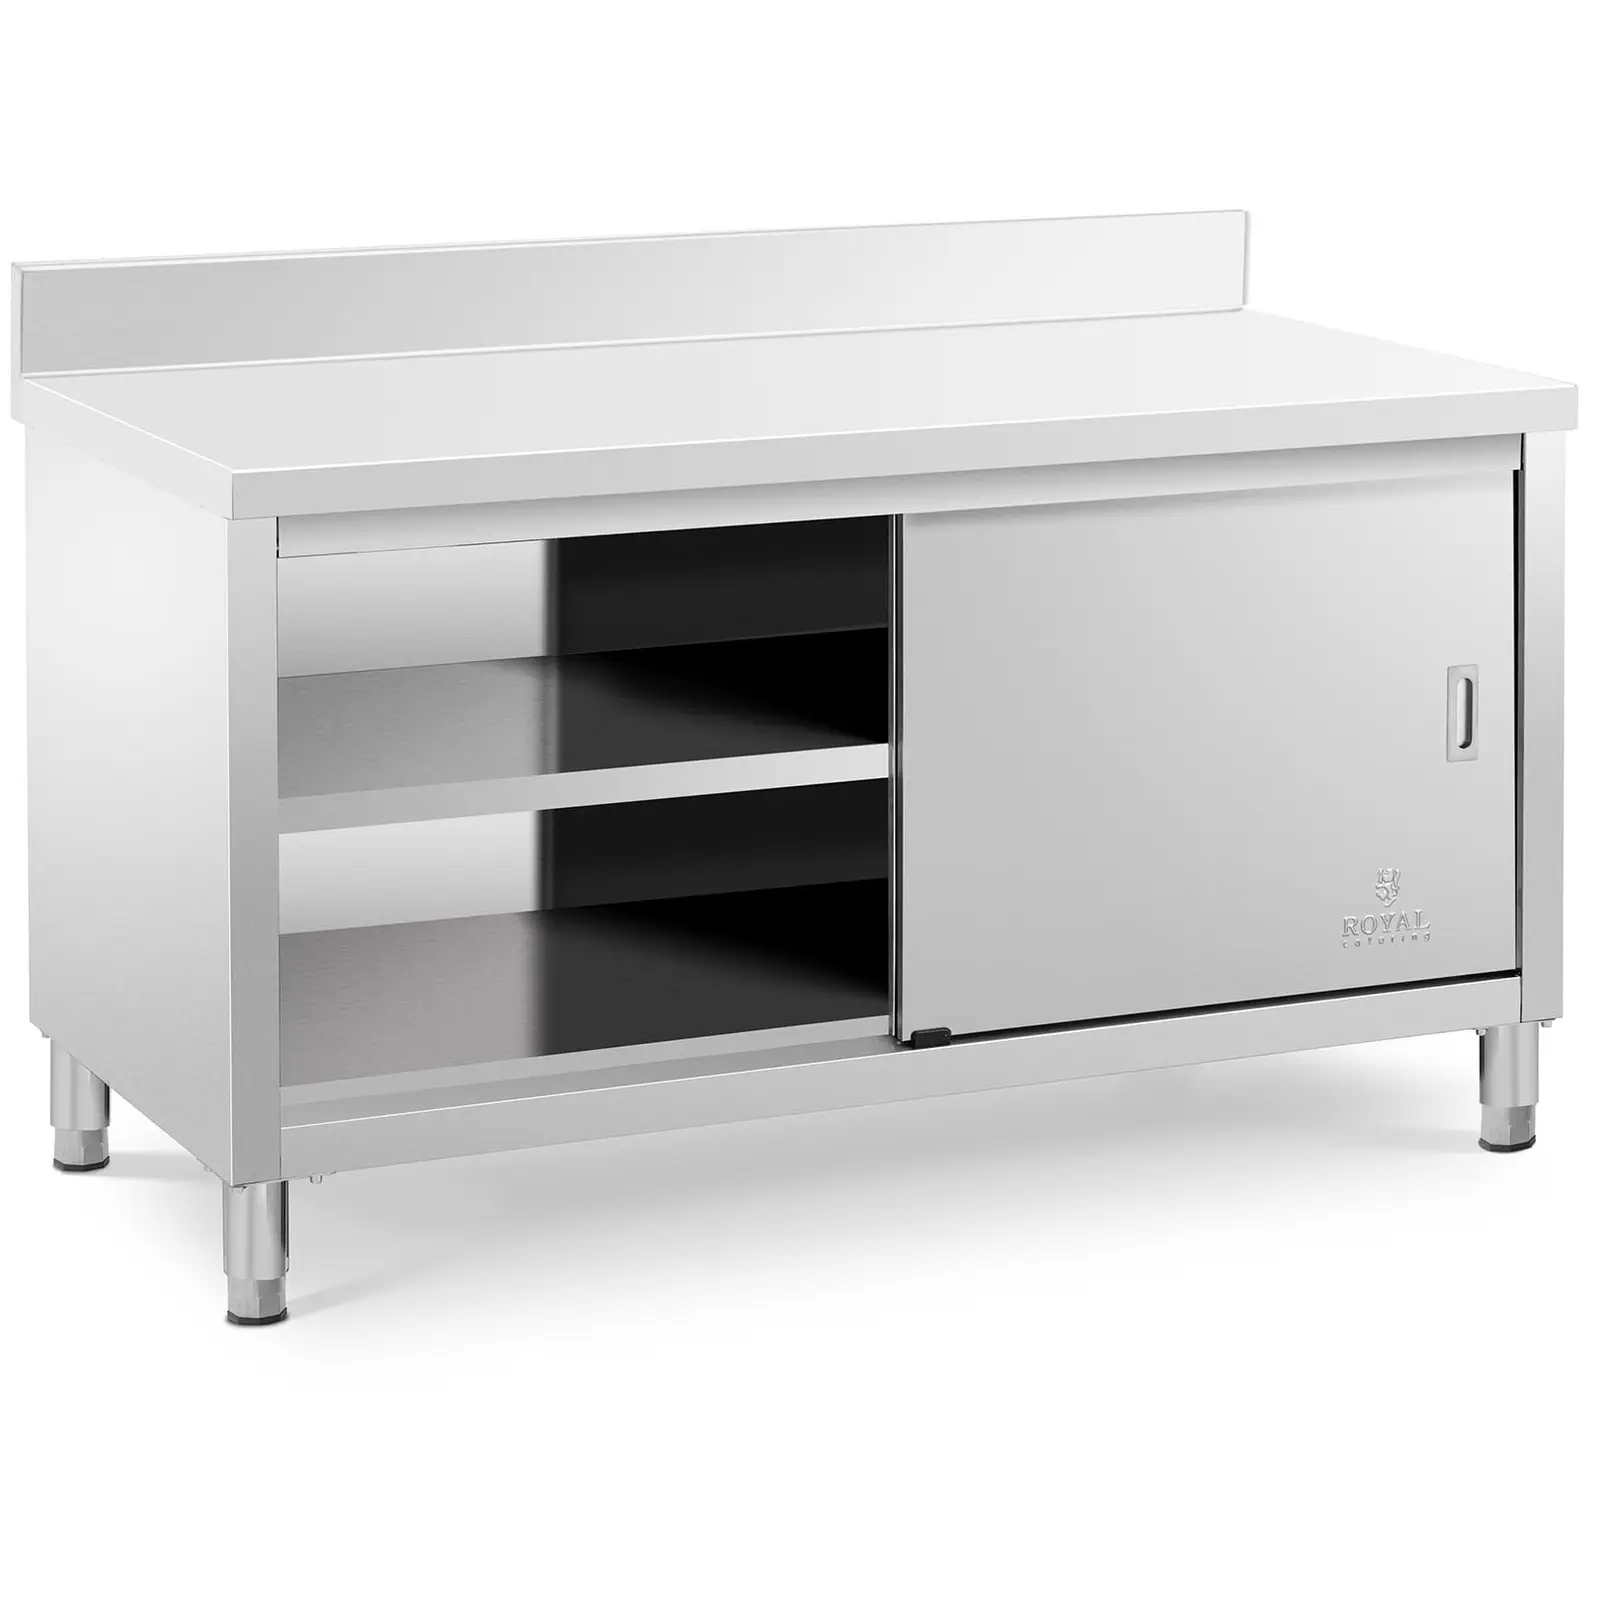 Stainless Steel Work Cabinet - 150 x 70 x 85 cm - Load Capacity - 600 kg